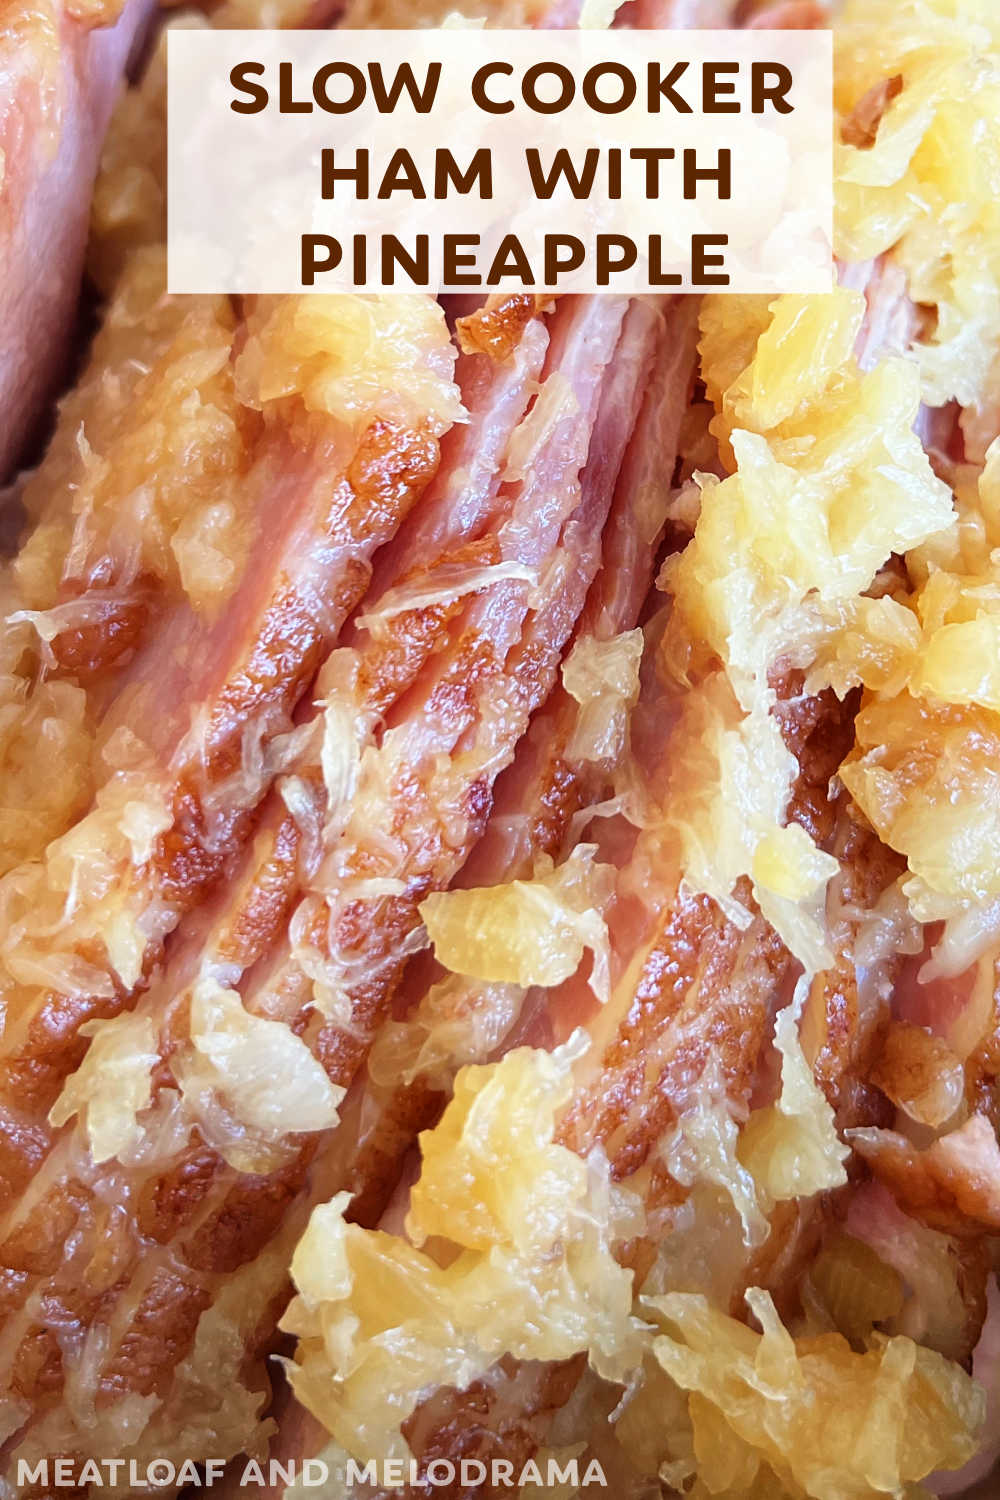 This Slow Cooker Brown Sugar Ham with Pineapple cooks low and slow in the crock pot for incredible flavor. Our easy recipe make the best holiday ham for Easter dinner, Christmas or any special occasion! via @meamel